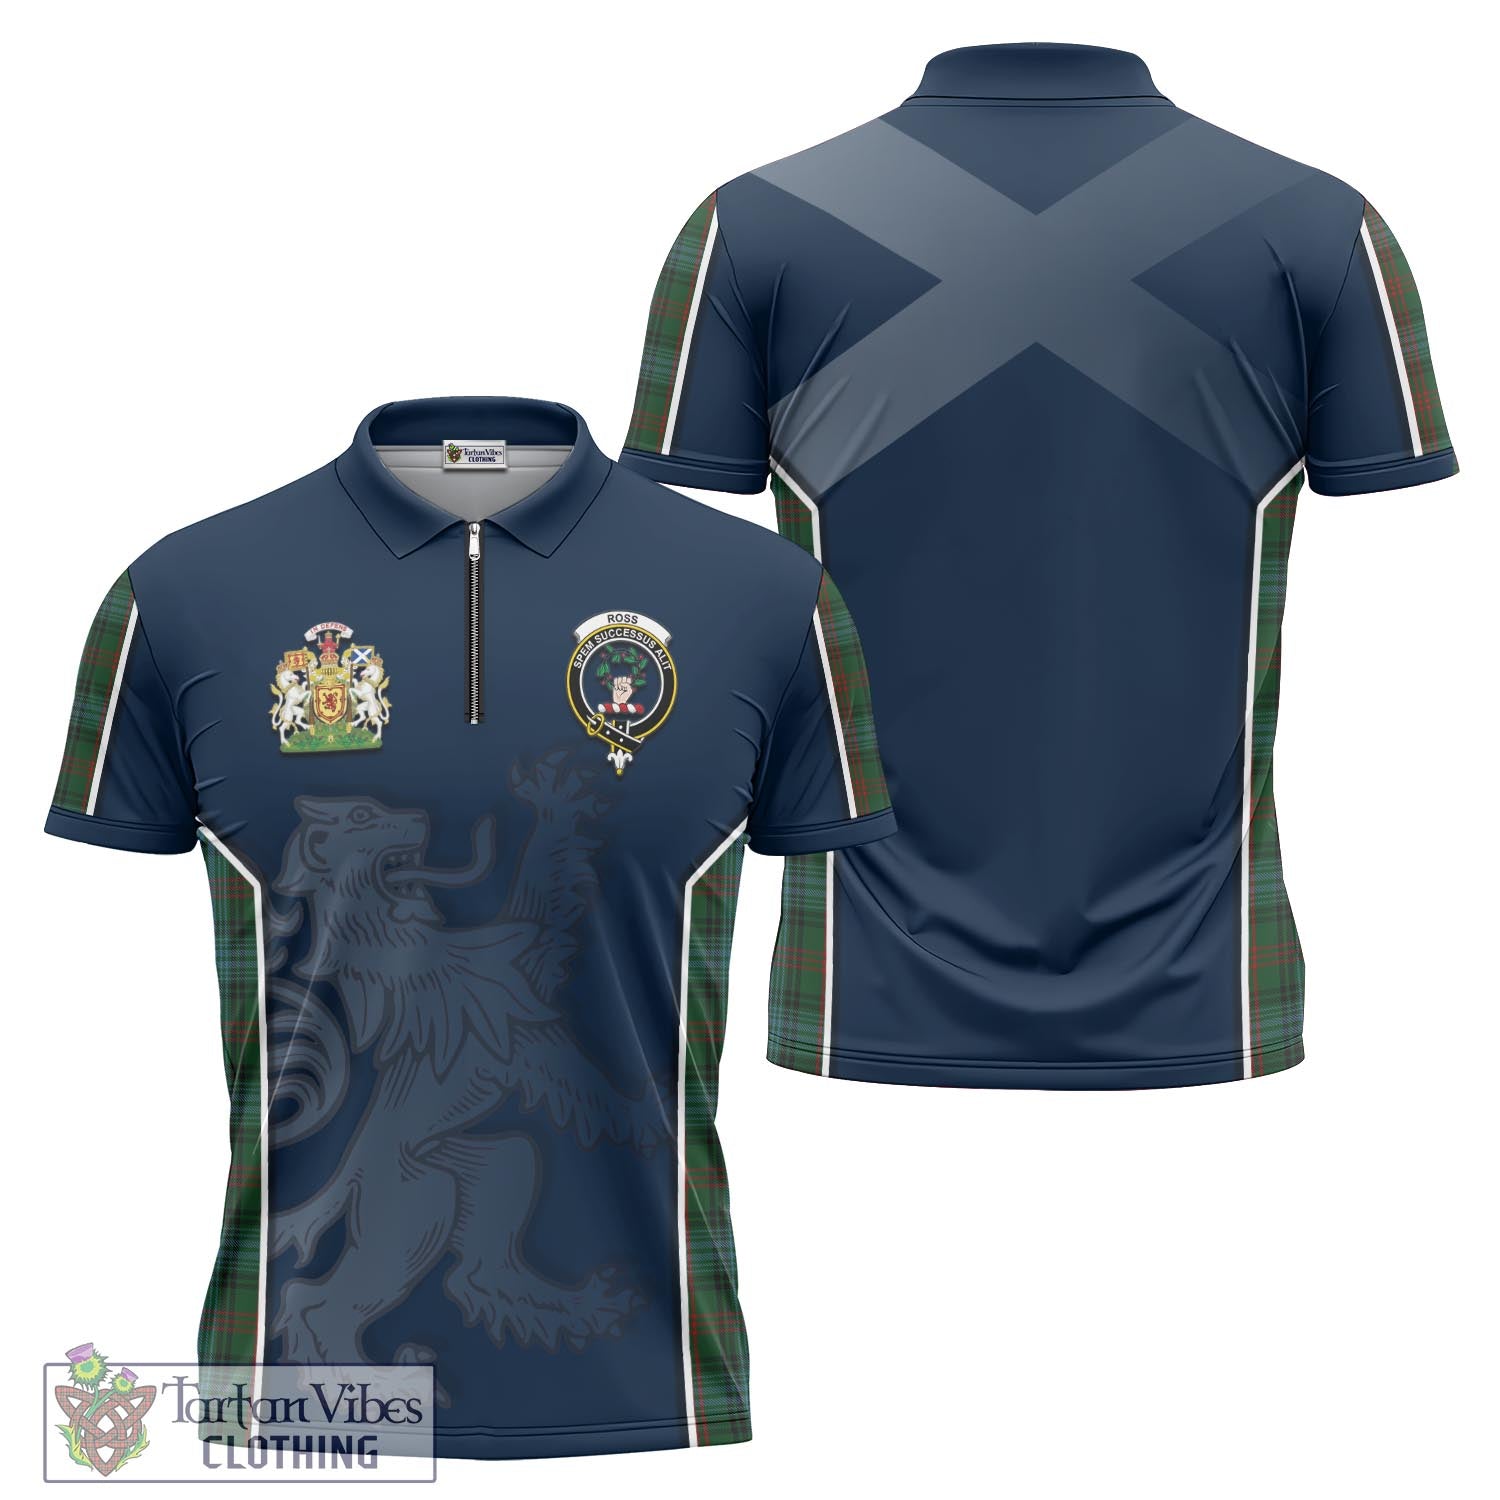 Tartan Vibes Clothing Ross Hunting Tartan Zipper Polo Shirt with Family Crest and Lion Rampant Vibes Sport Style